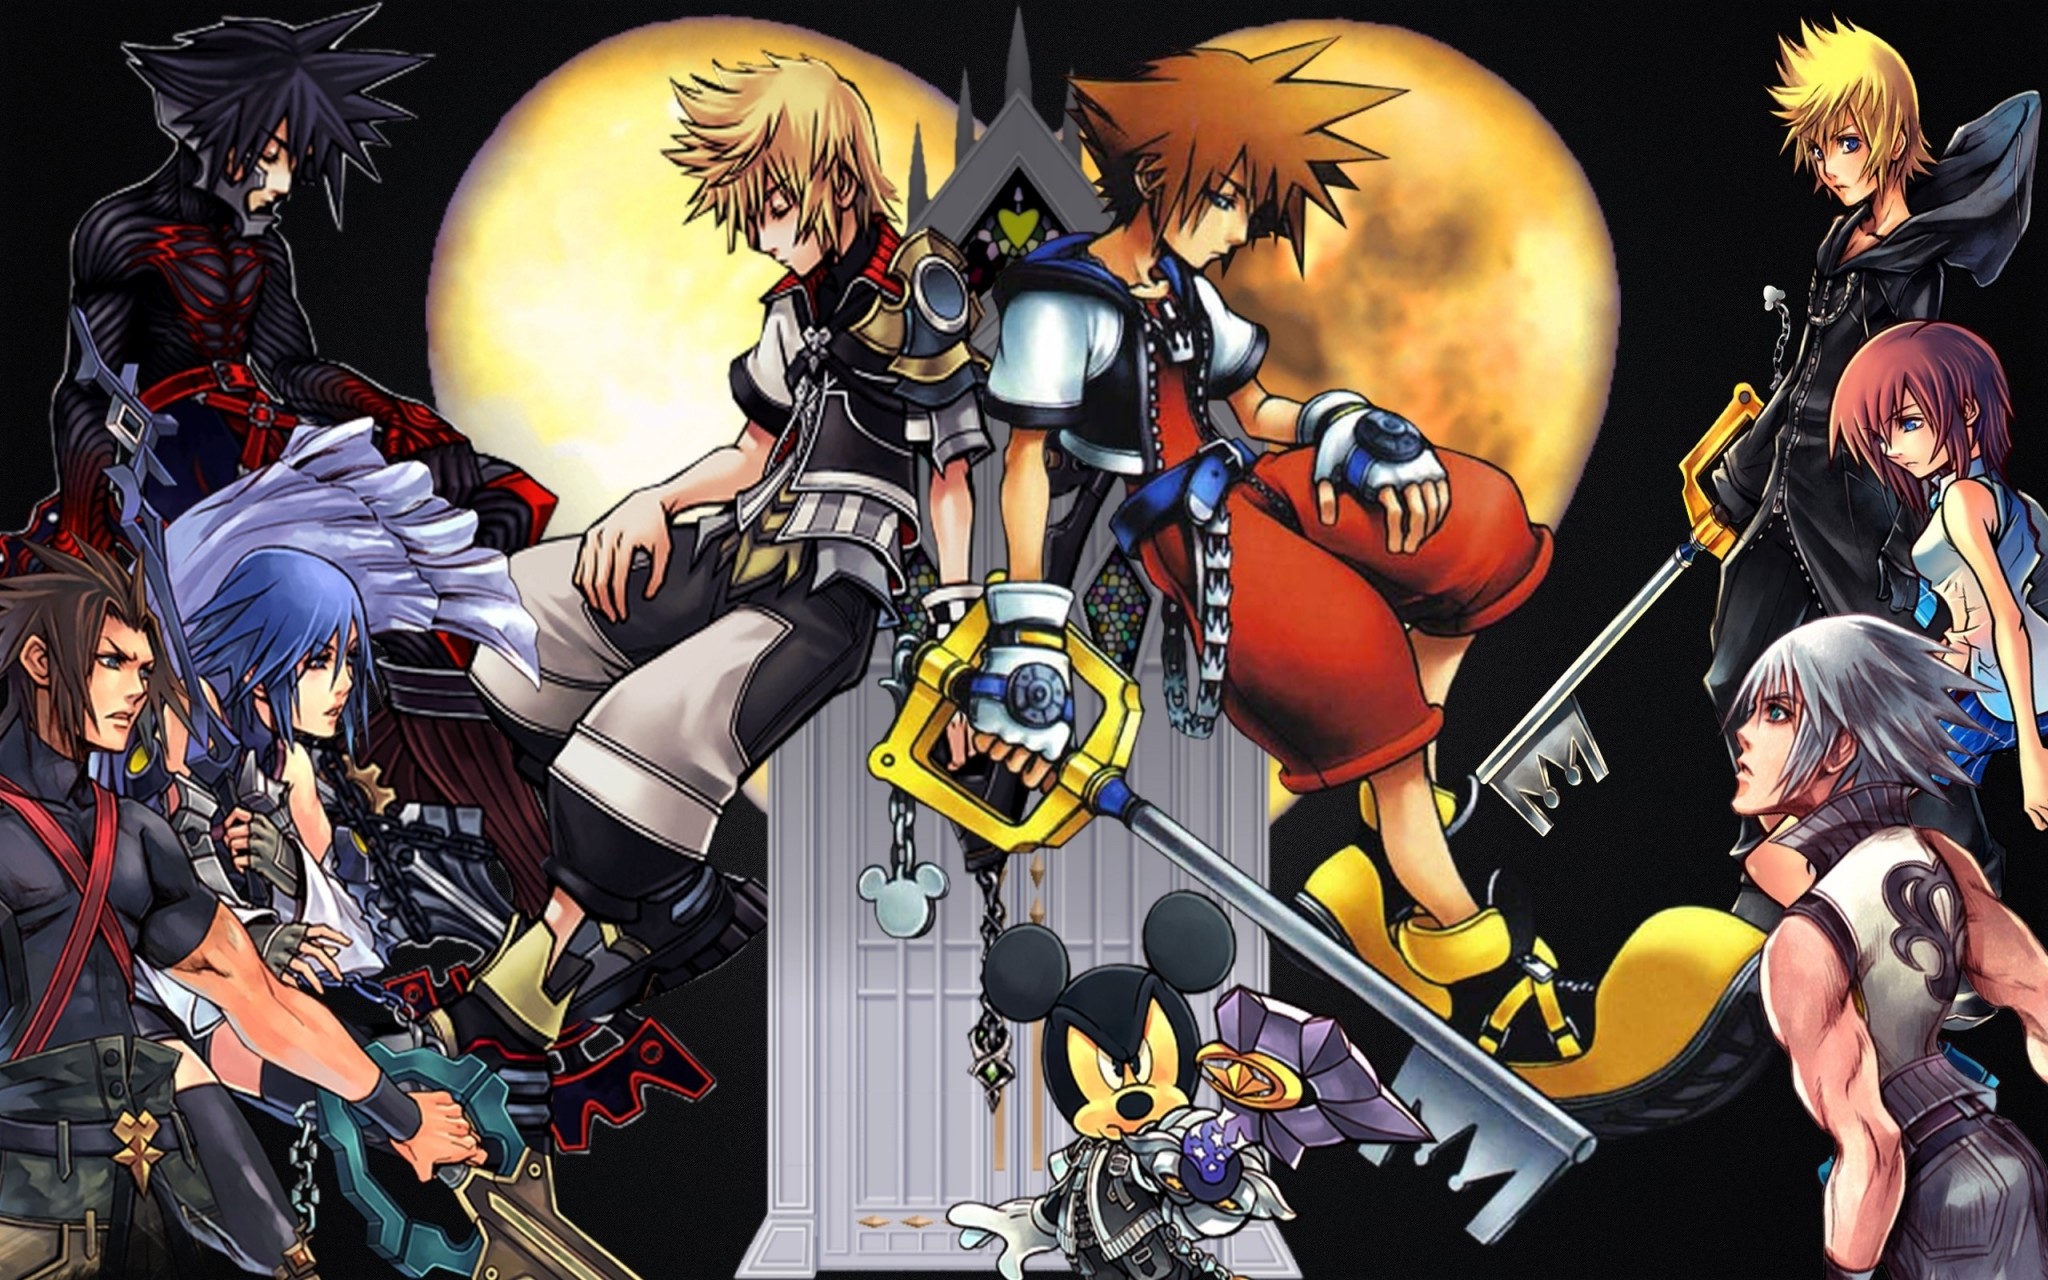 Kingdom Hearts Wallpaper Kingdom Hearts Wallpaper Pc Hd Wallpaper Backgrounds Download